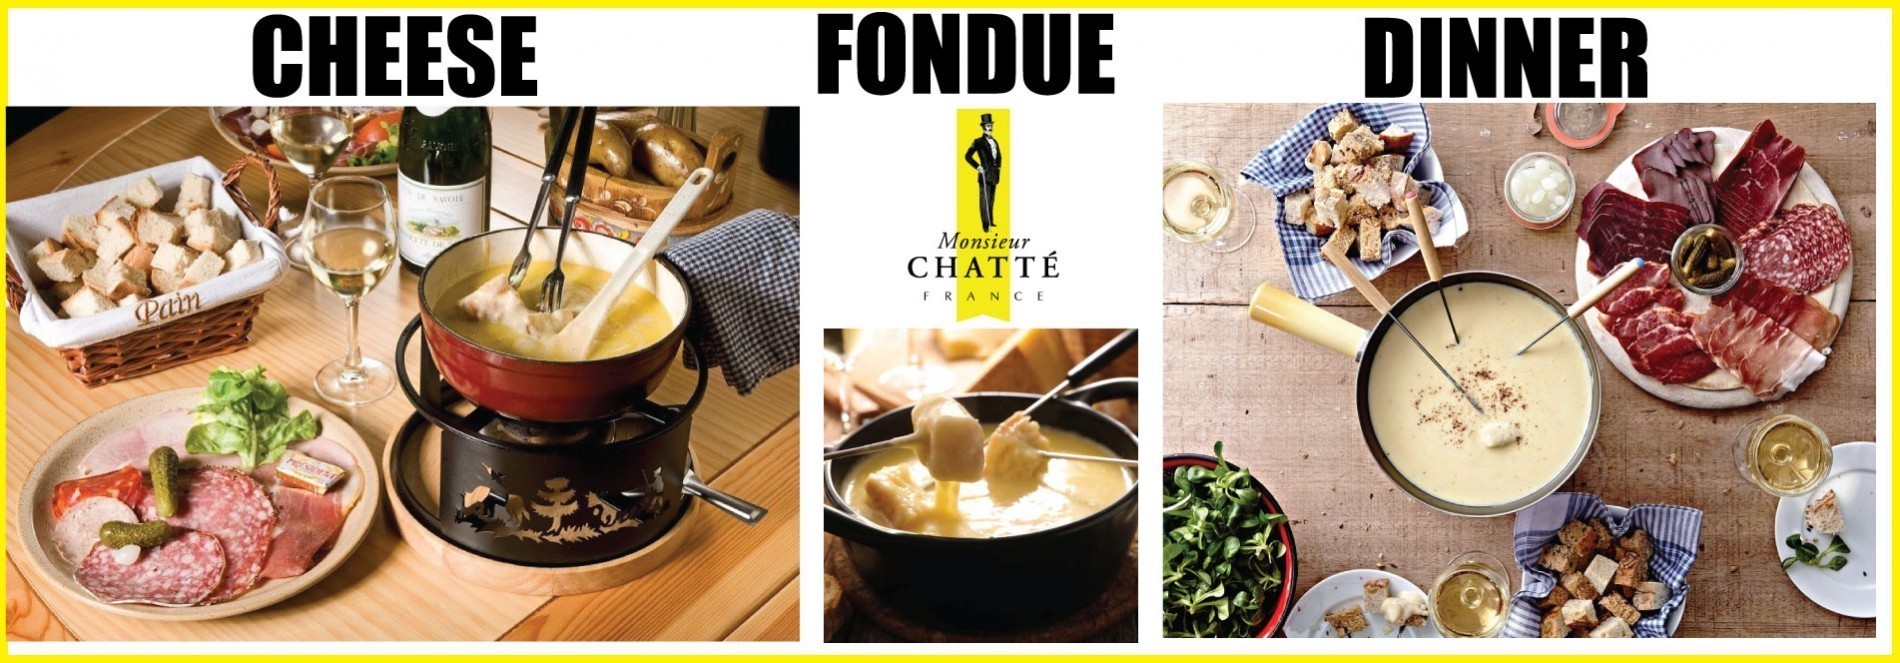 Cheese Fondue Dinner for 2 persons